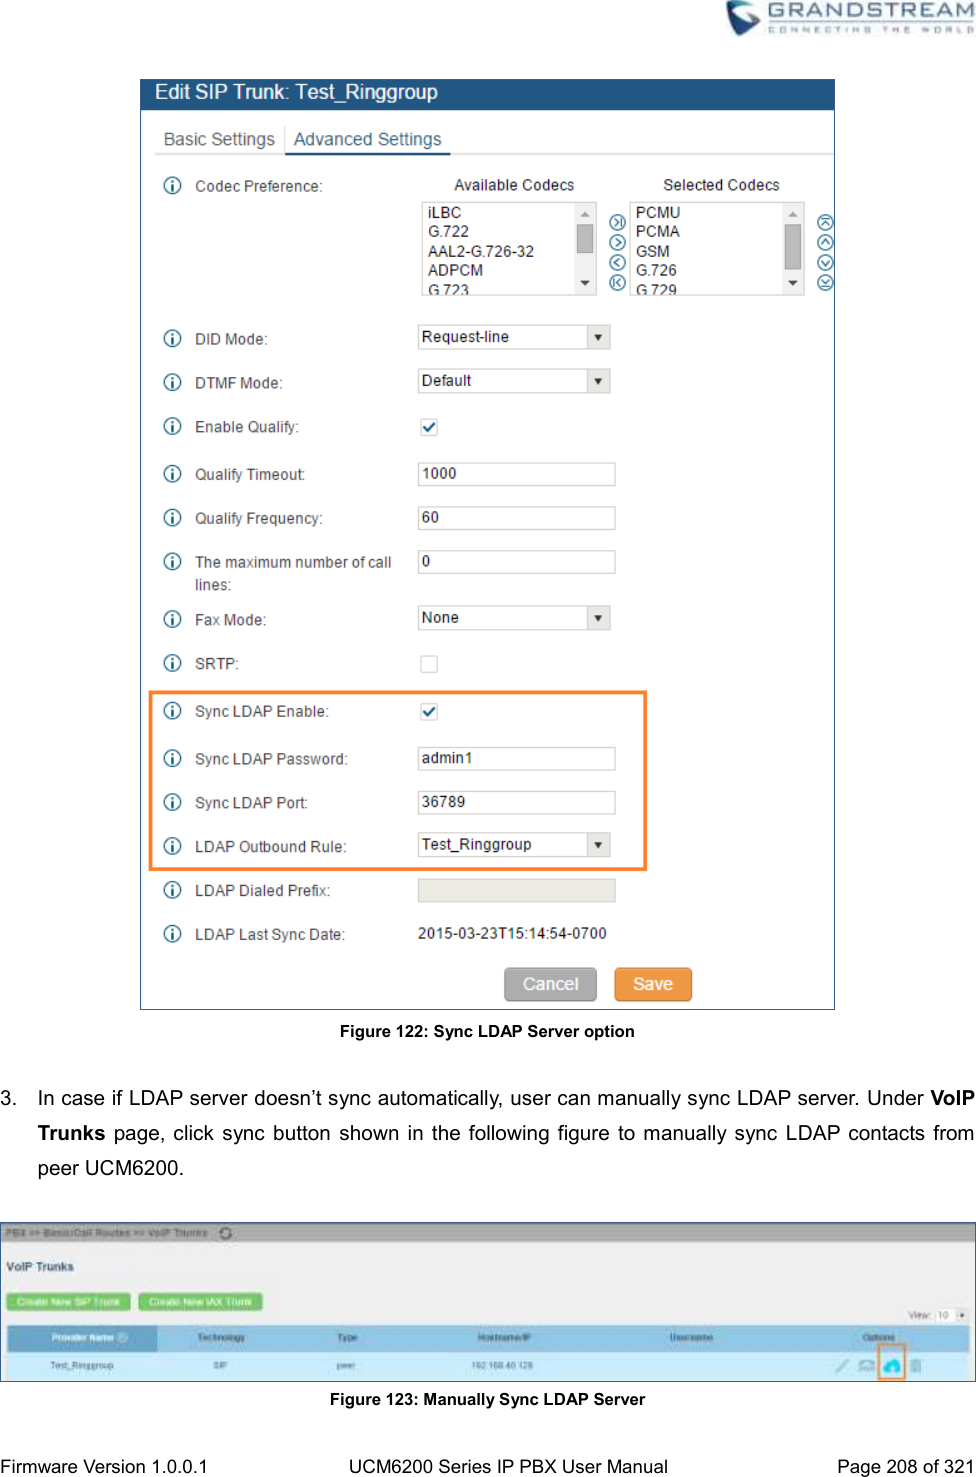  Firmware Version 1.0.0.1 UCM6200 Series IP PBX User Manual Page 208 of 321     Figure 122: Sync LDAP Server option  3.  In case if LDAP server doesn’t sync automatically, user can manually sync LDAP server. Under VoIP Trunks page, click  sync button  shown  in the following figure to manually sync  LDAP contacts from peer UCM6200.   Figure 123: Manually Sync LDAP Server 